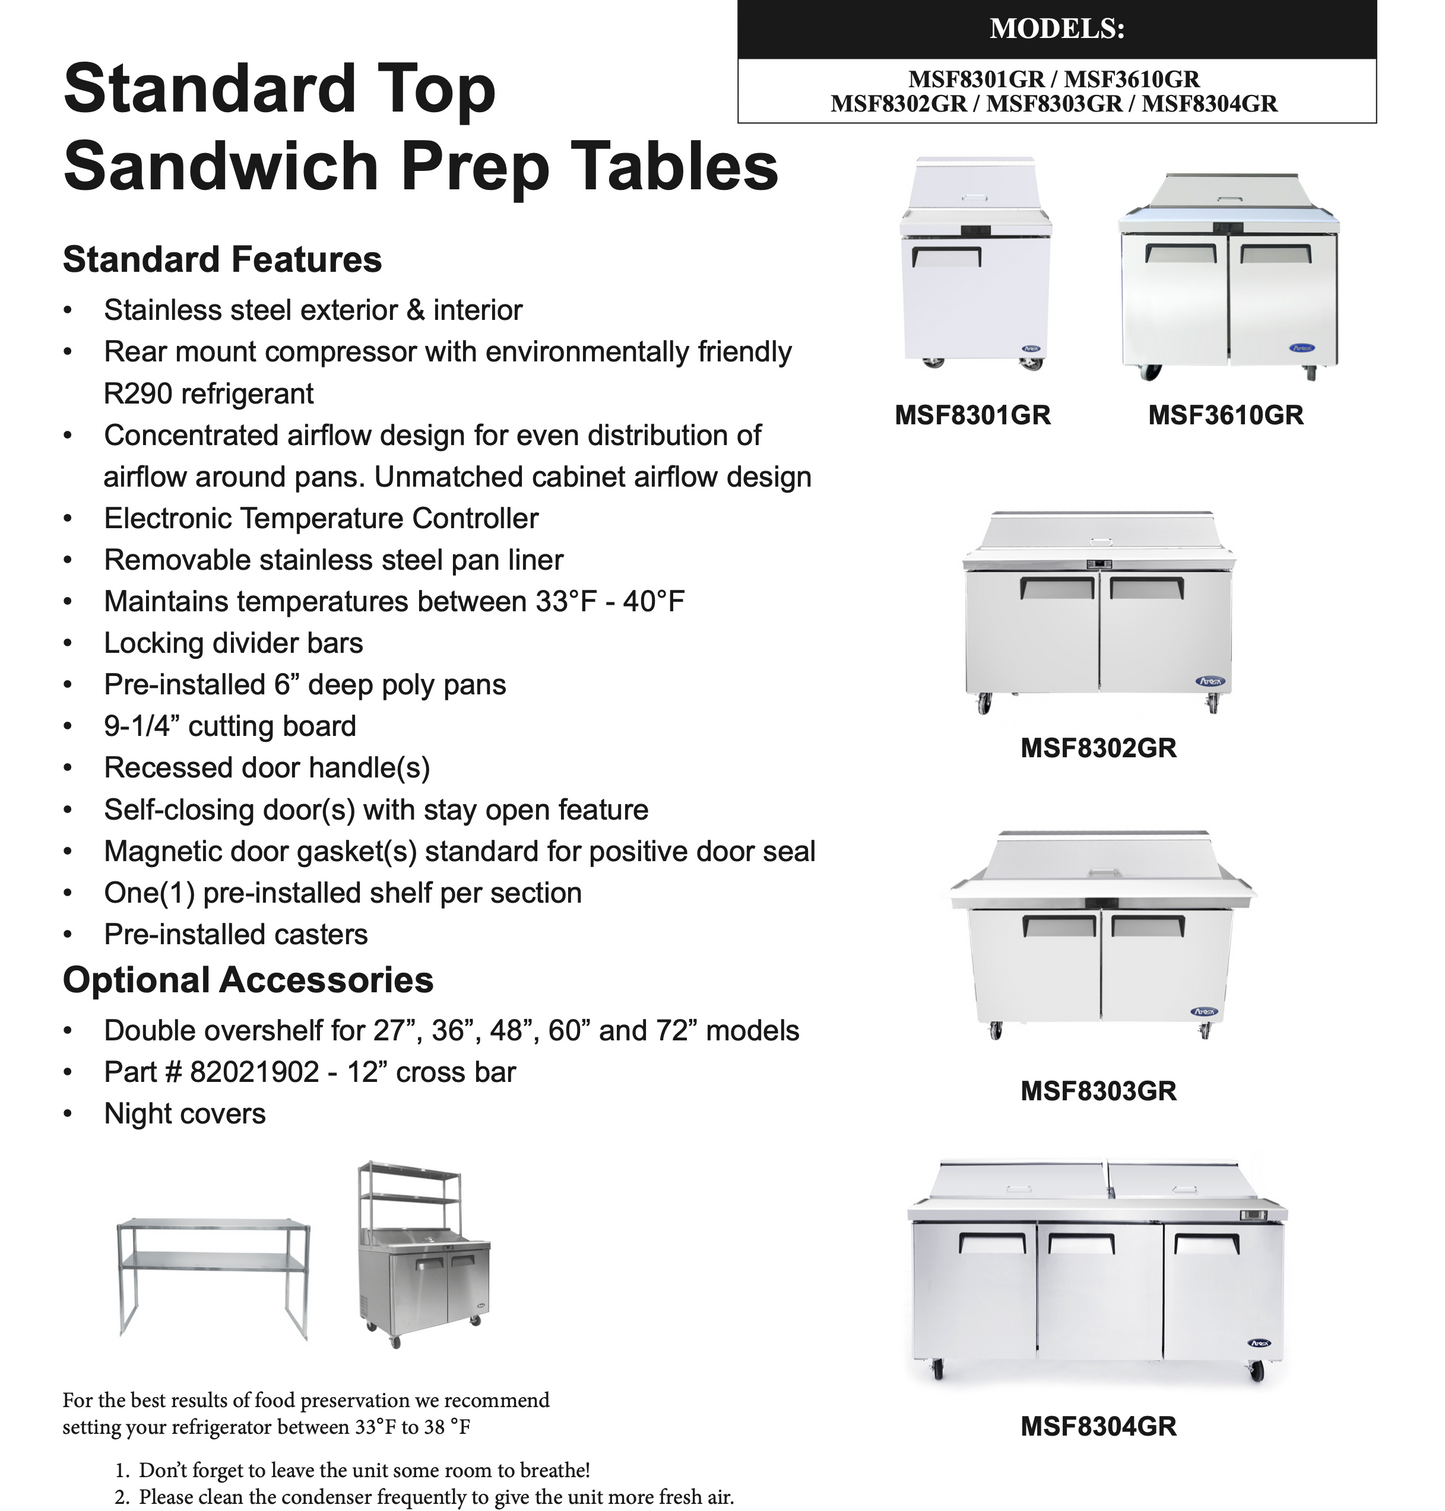 MSF8303GR  60 Inch Commercial Refrigerator Standard Top Sandwich Prep. Table, 369317